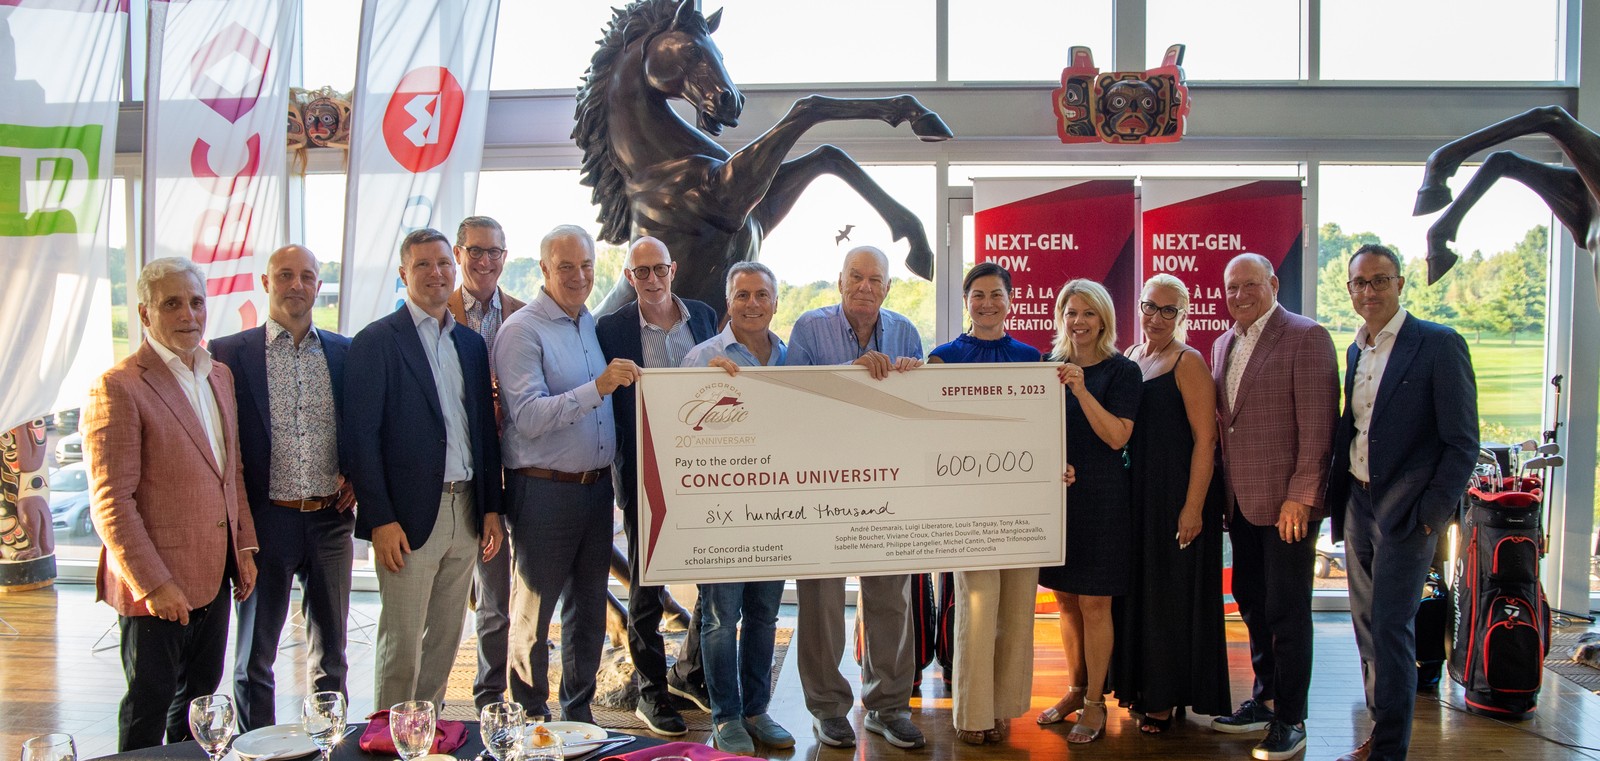 Organizers and supporters of the 2023 Golf Classic hold a giant cheque for $600,000, paid to Concordia University